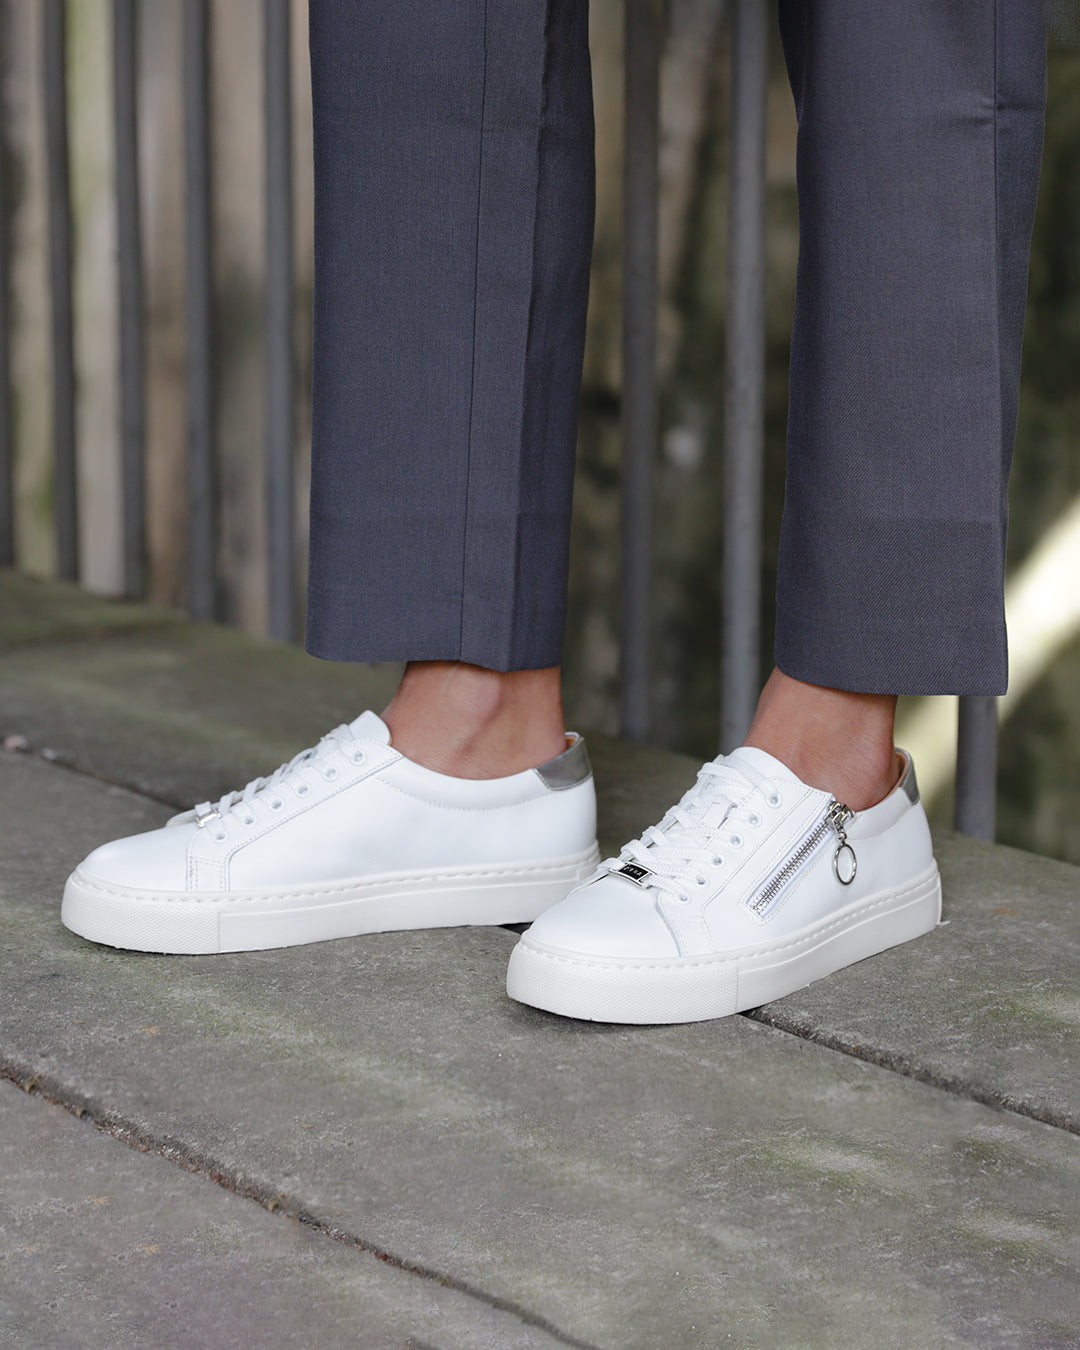 CARIUMA: Classic Women's Sneakers | Ethically Made & Sustainable